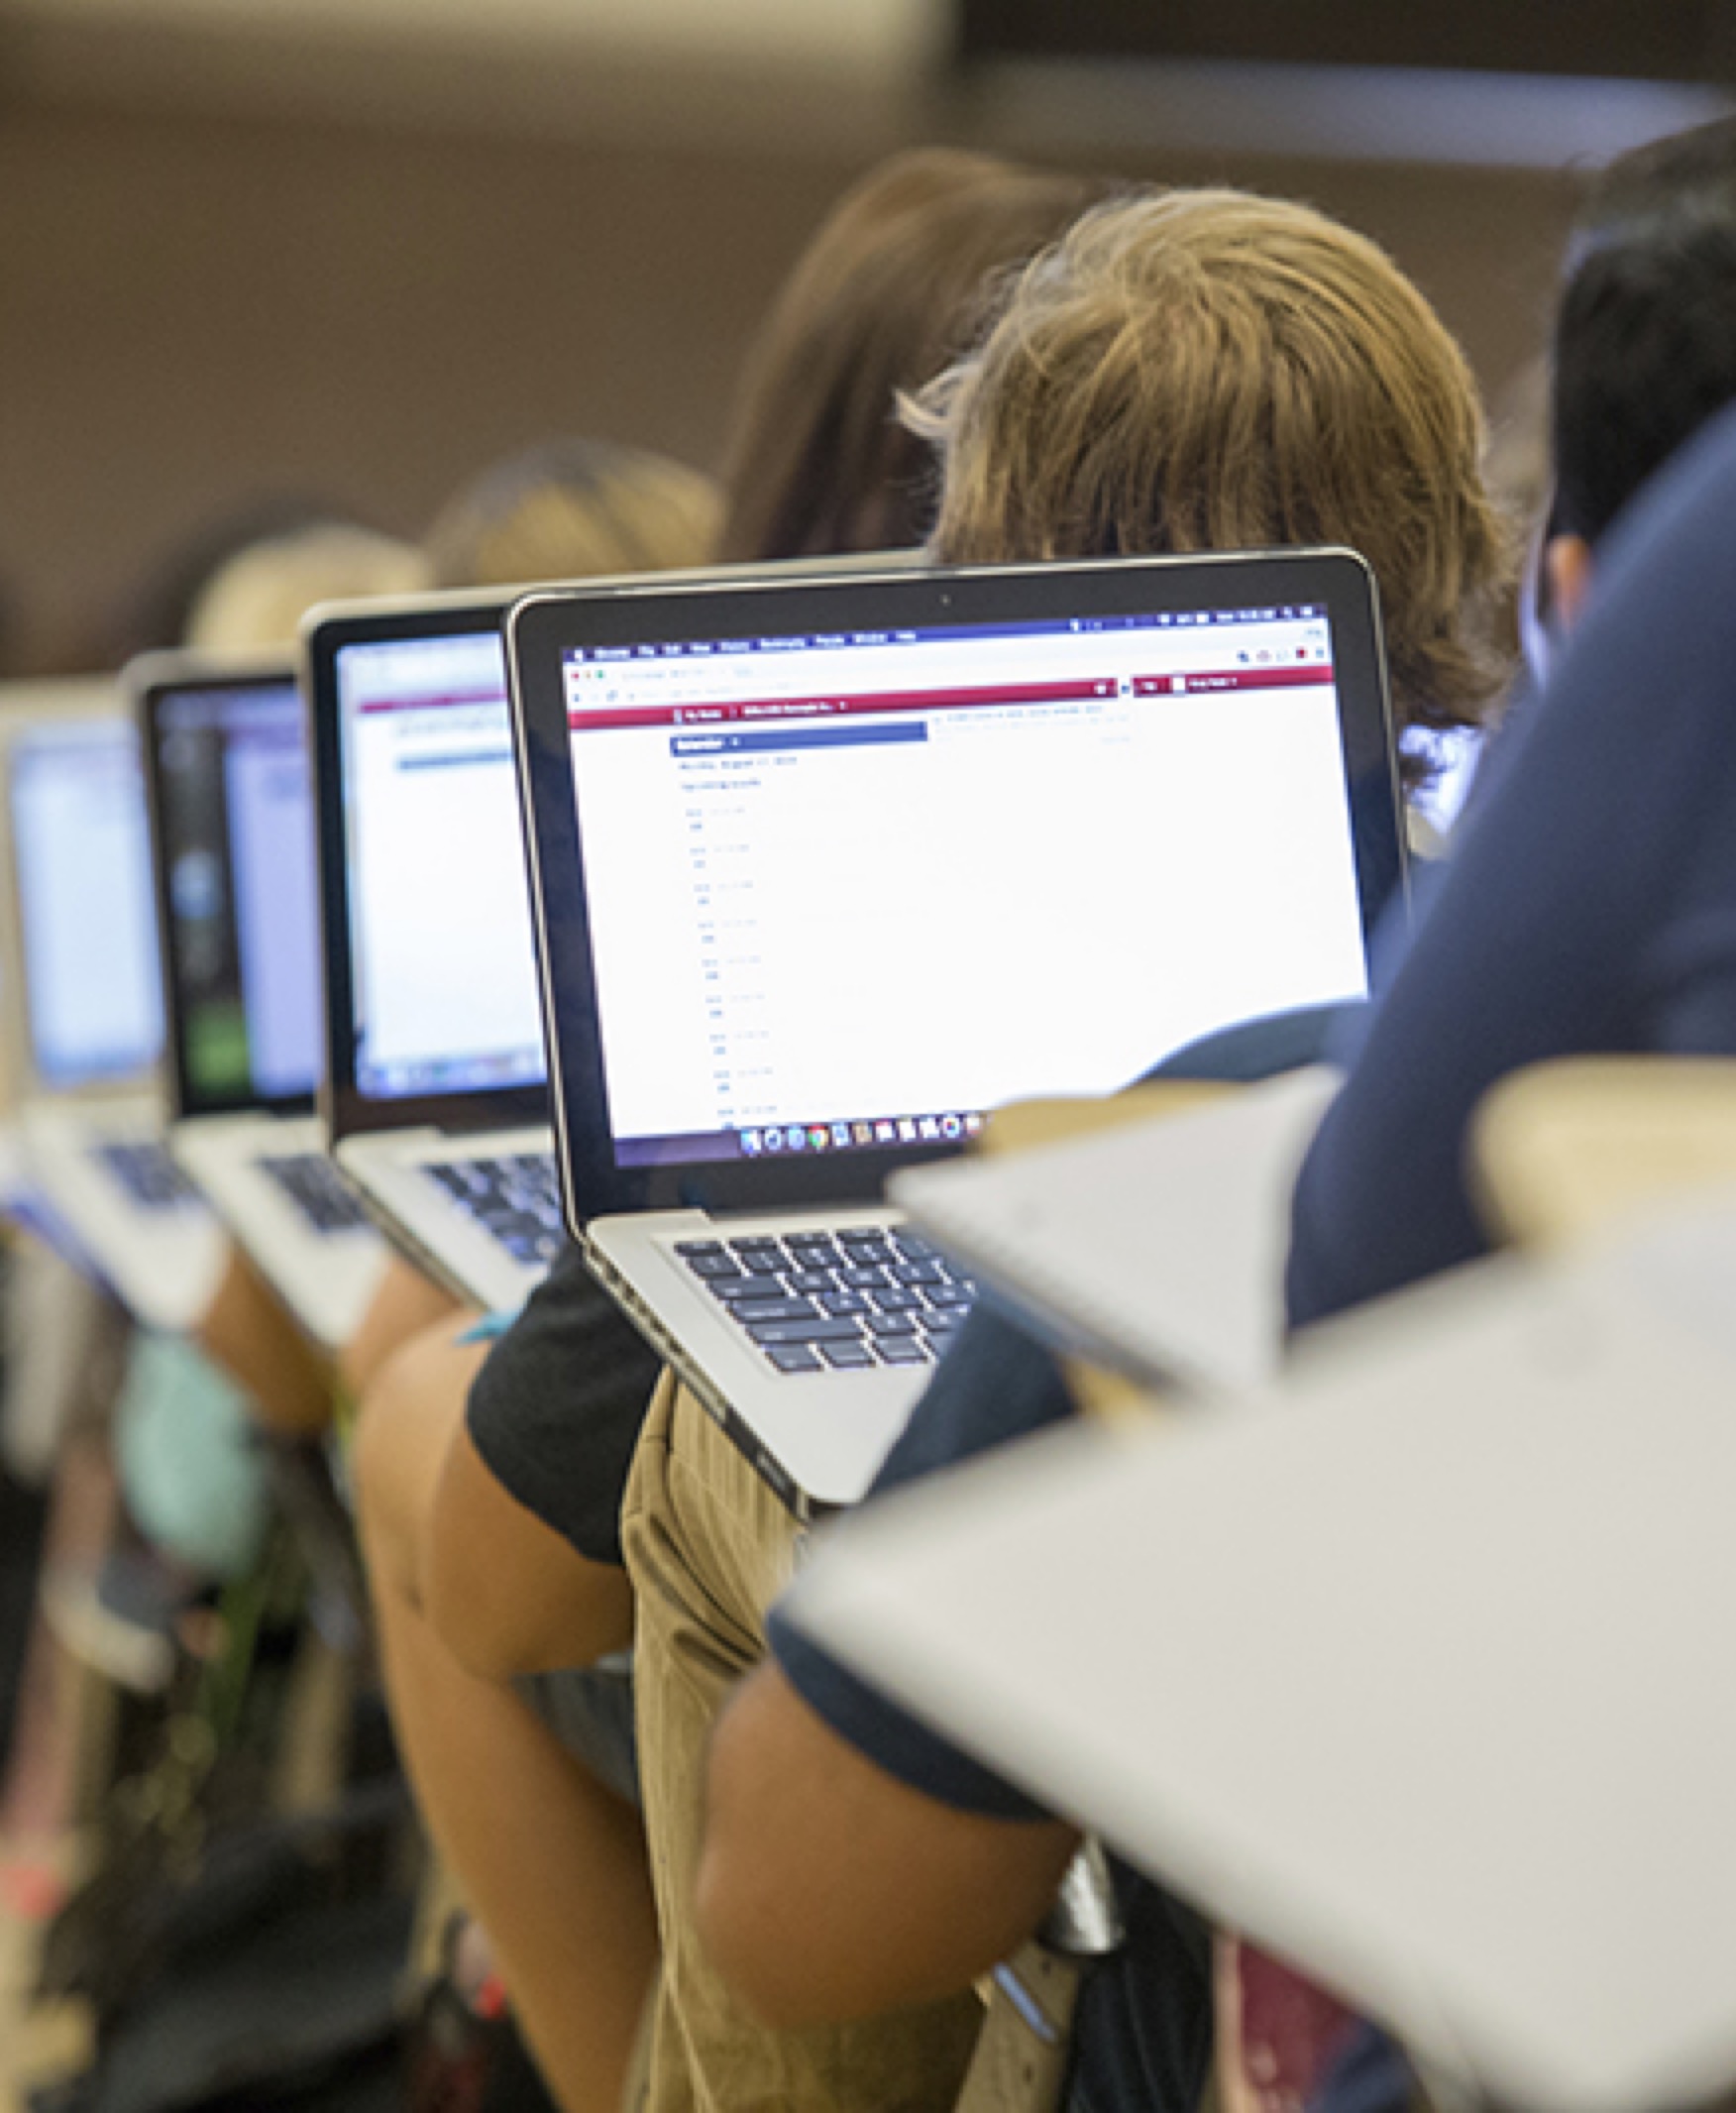 Students are sitting in a lecture hall on campus. The laptop screens of the students are visible in the image.